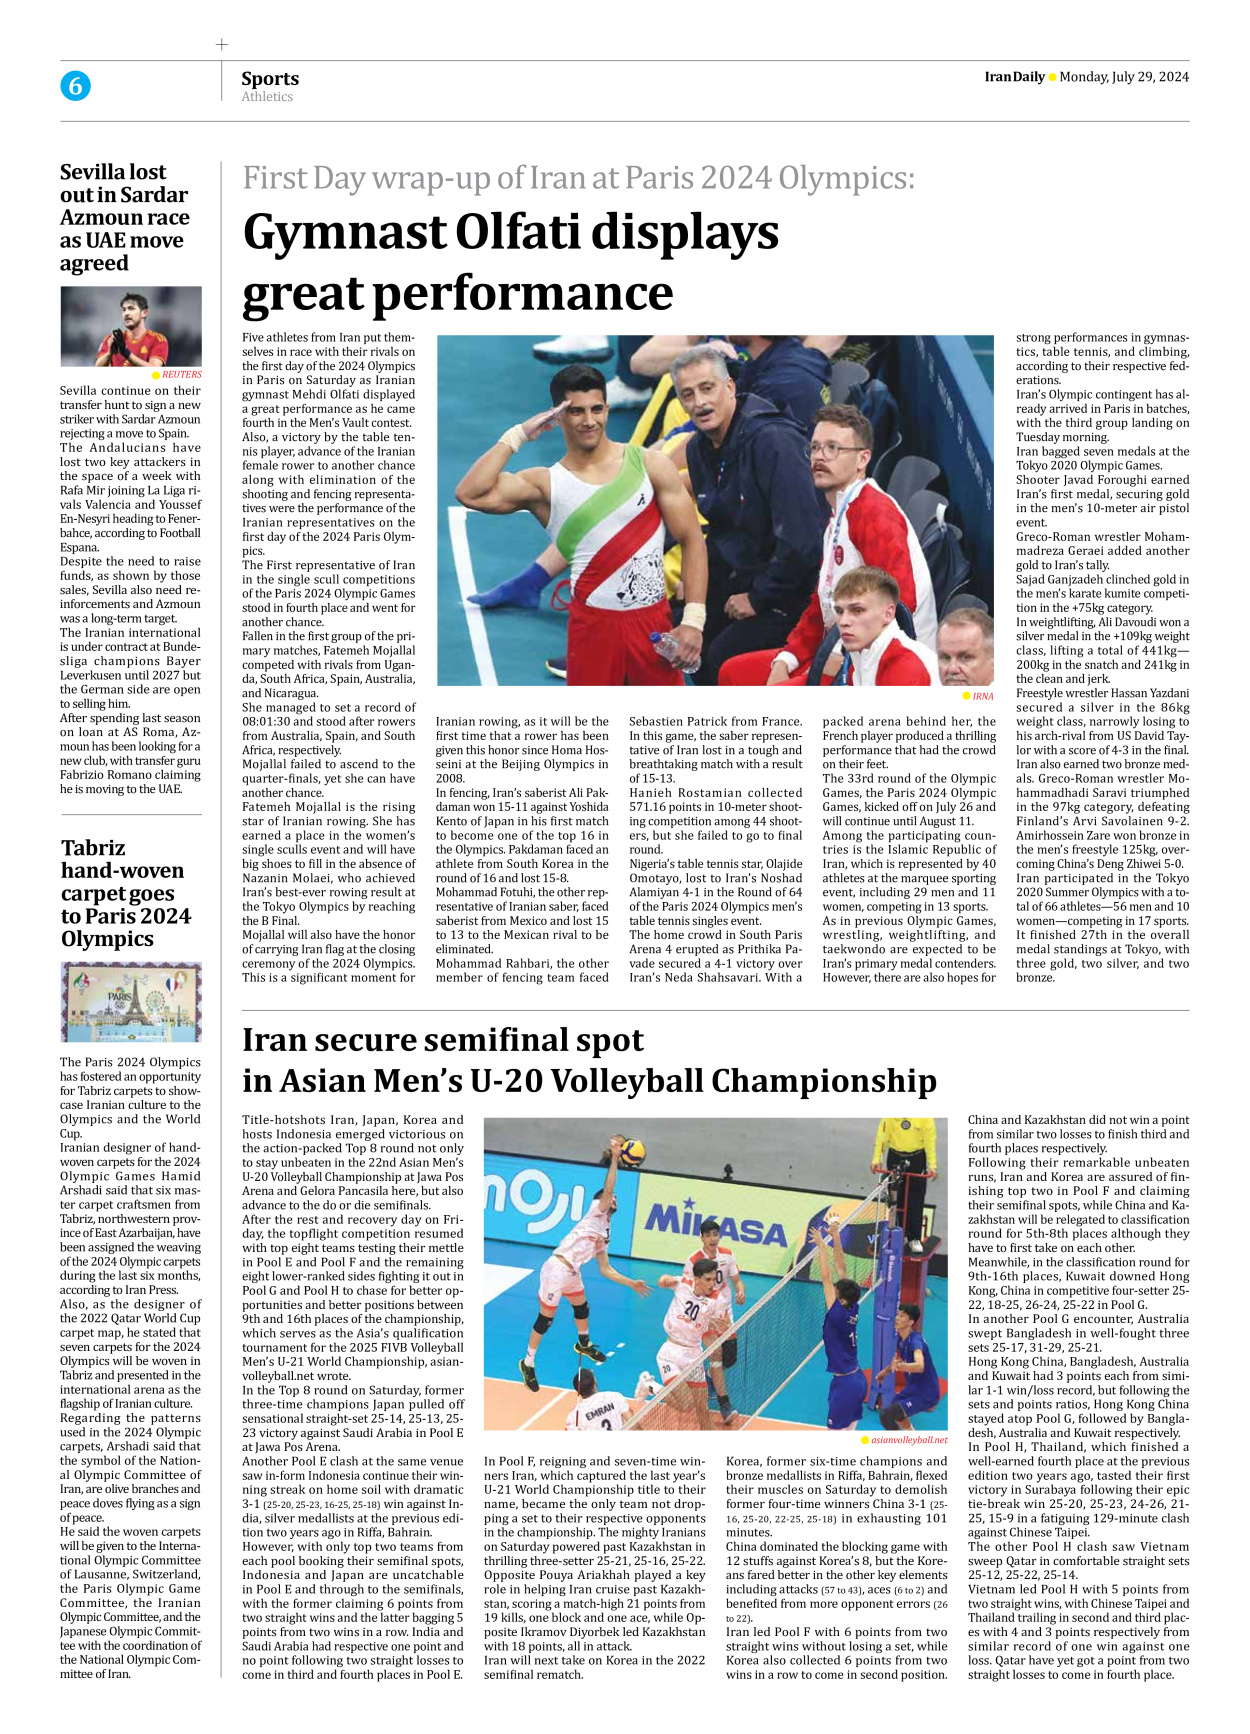 Iran Daily - Number Seven Thousand Six Hundred and Fourteen - 29 July 2024 - Page 6